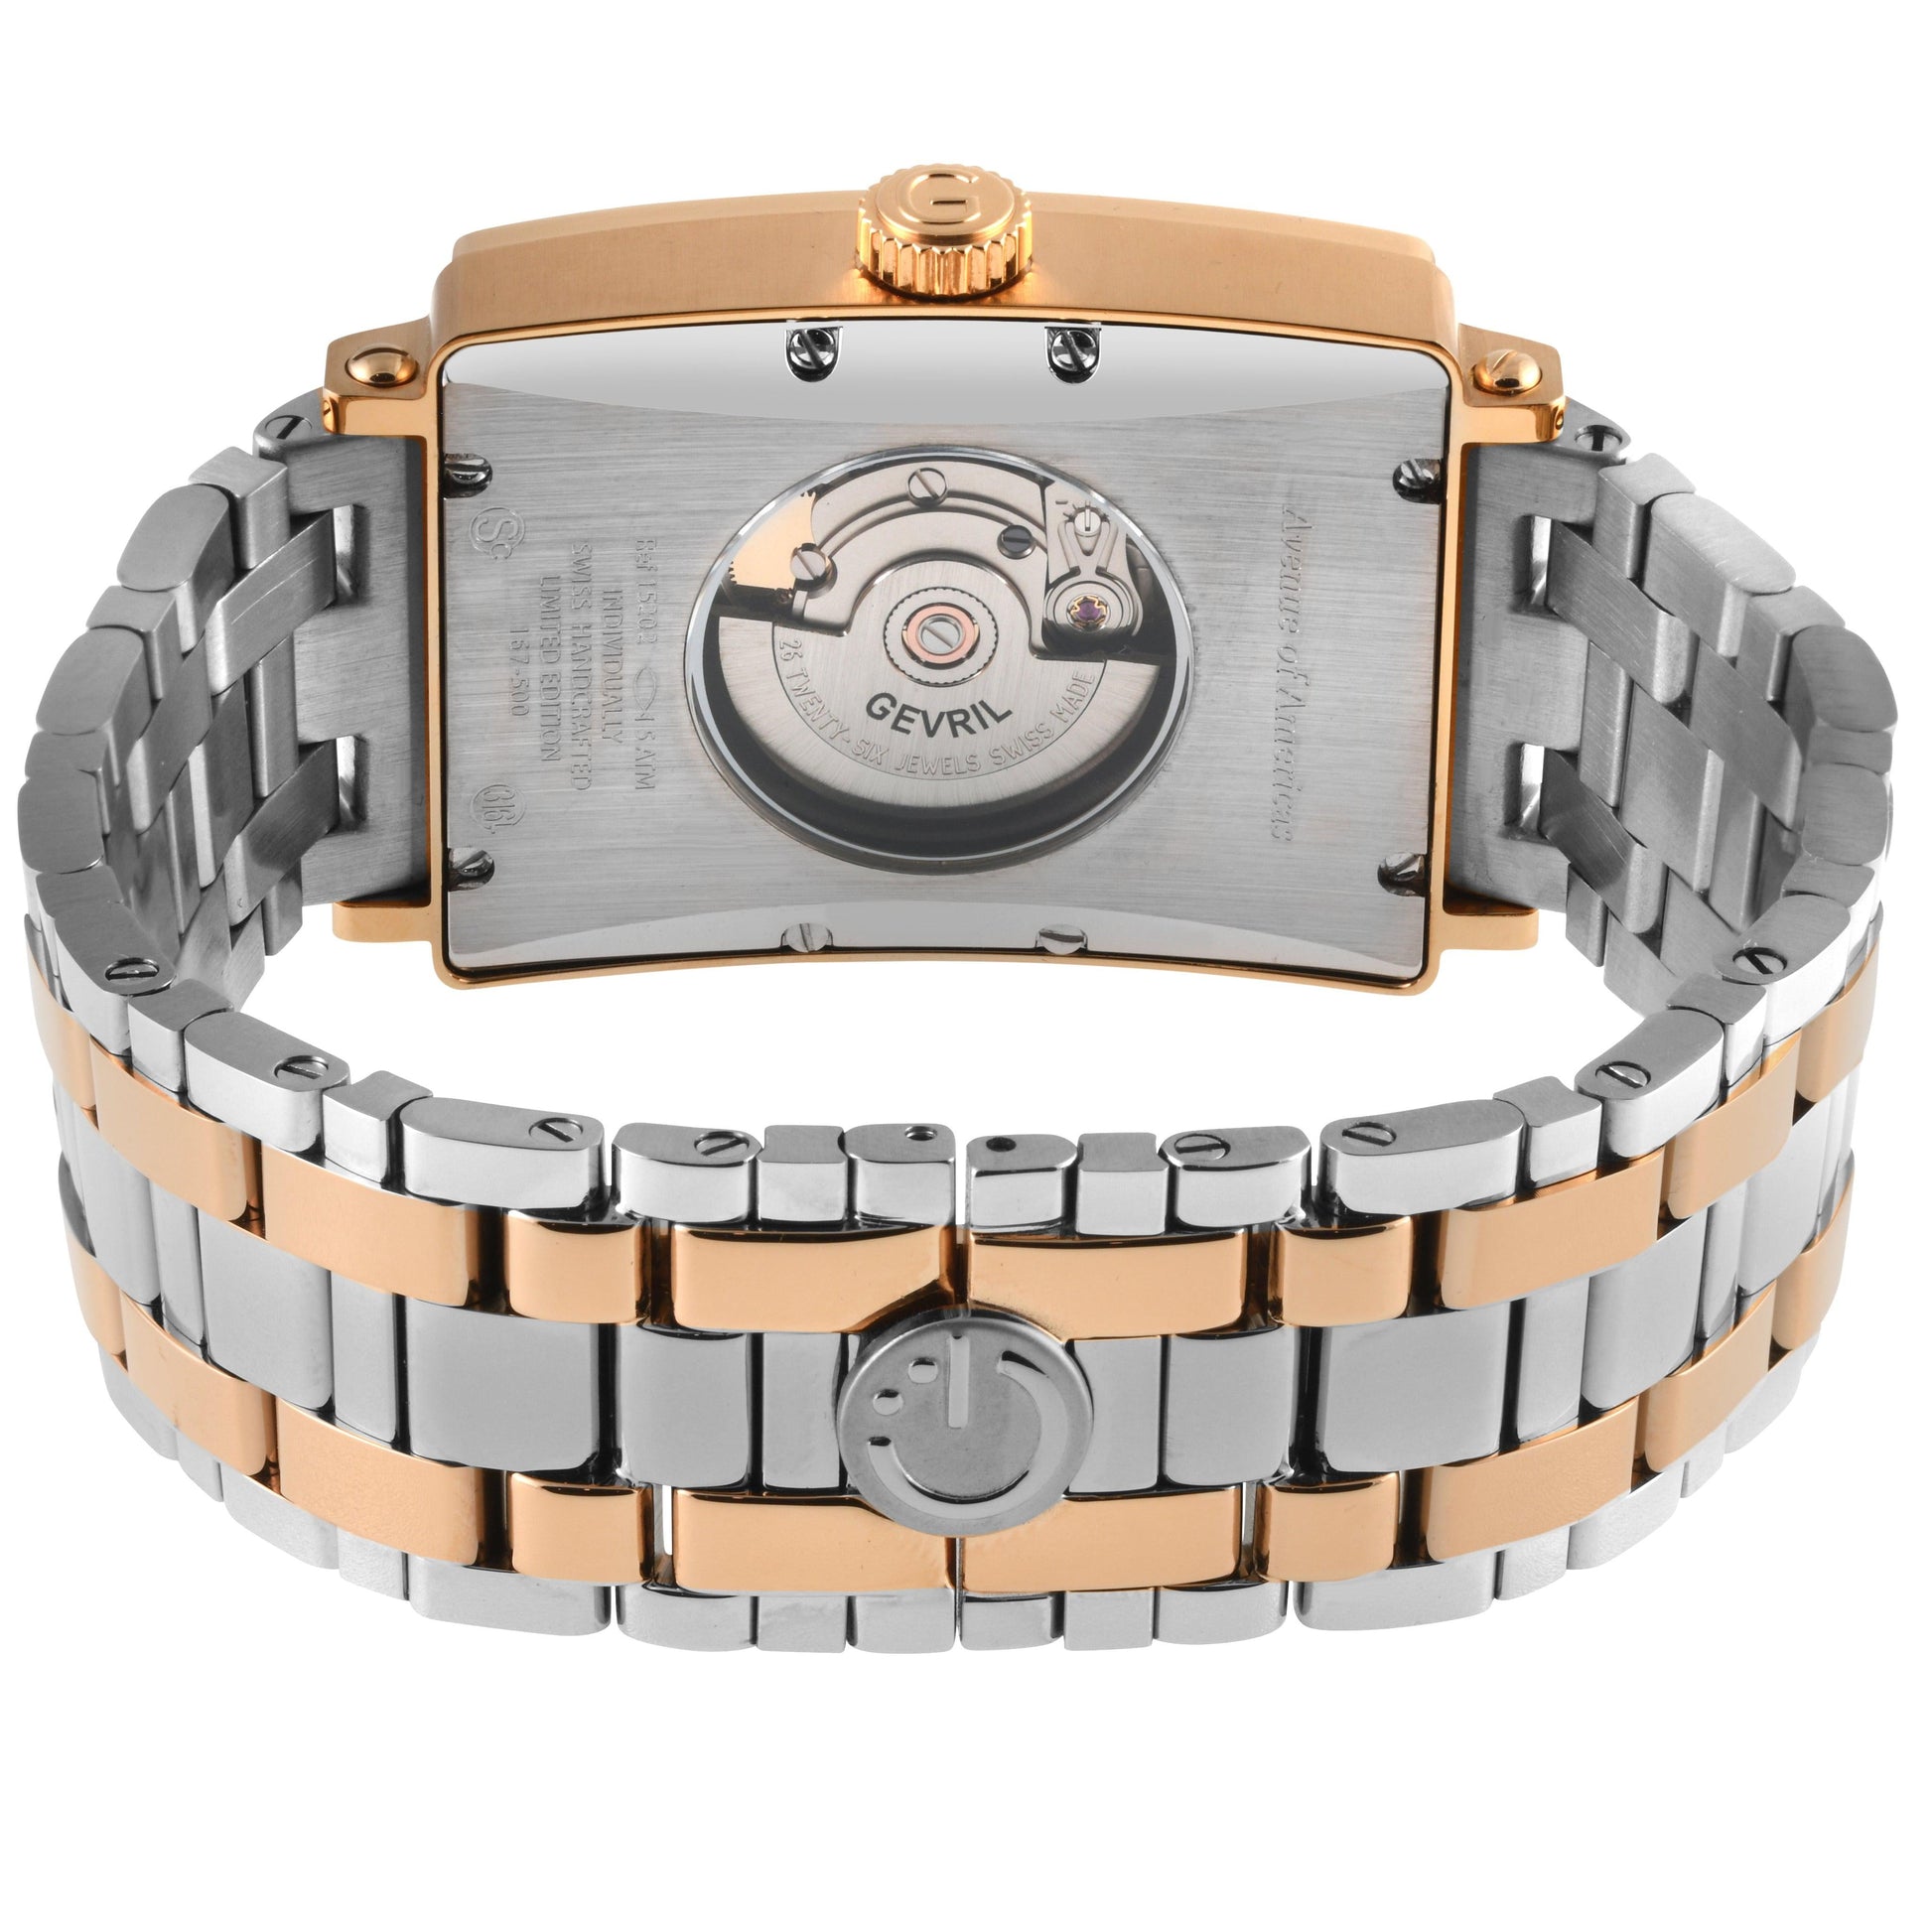 Gevril-Luxury-Swiss-Watches-Gevril Avenue of Americas-15202B